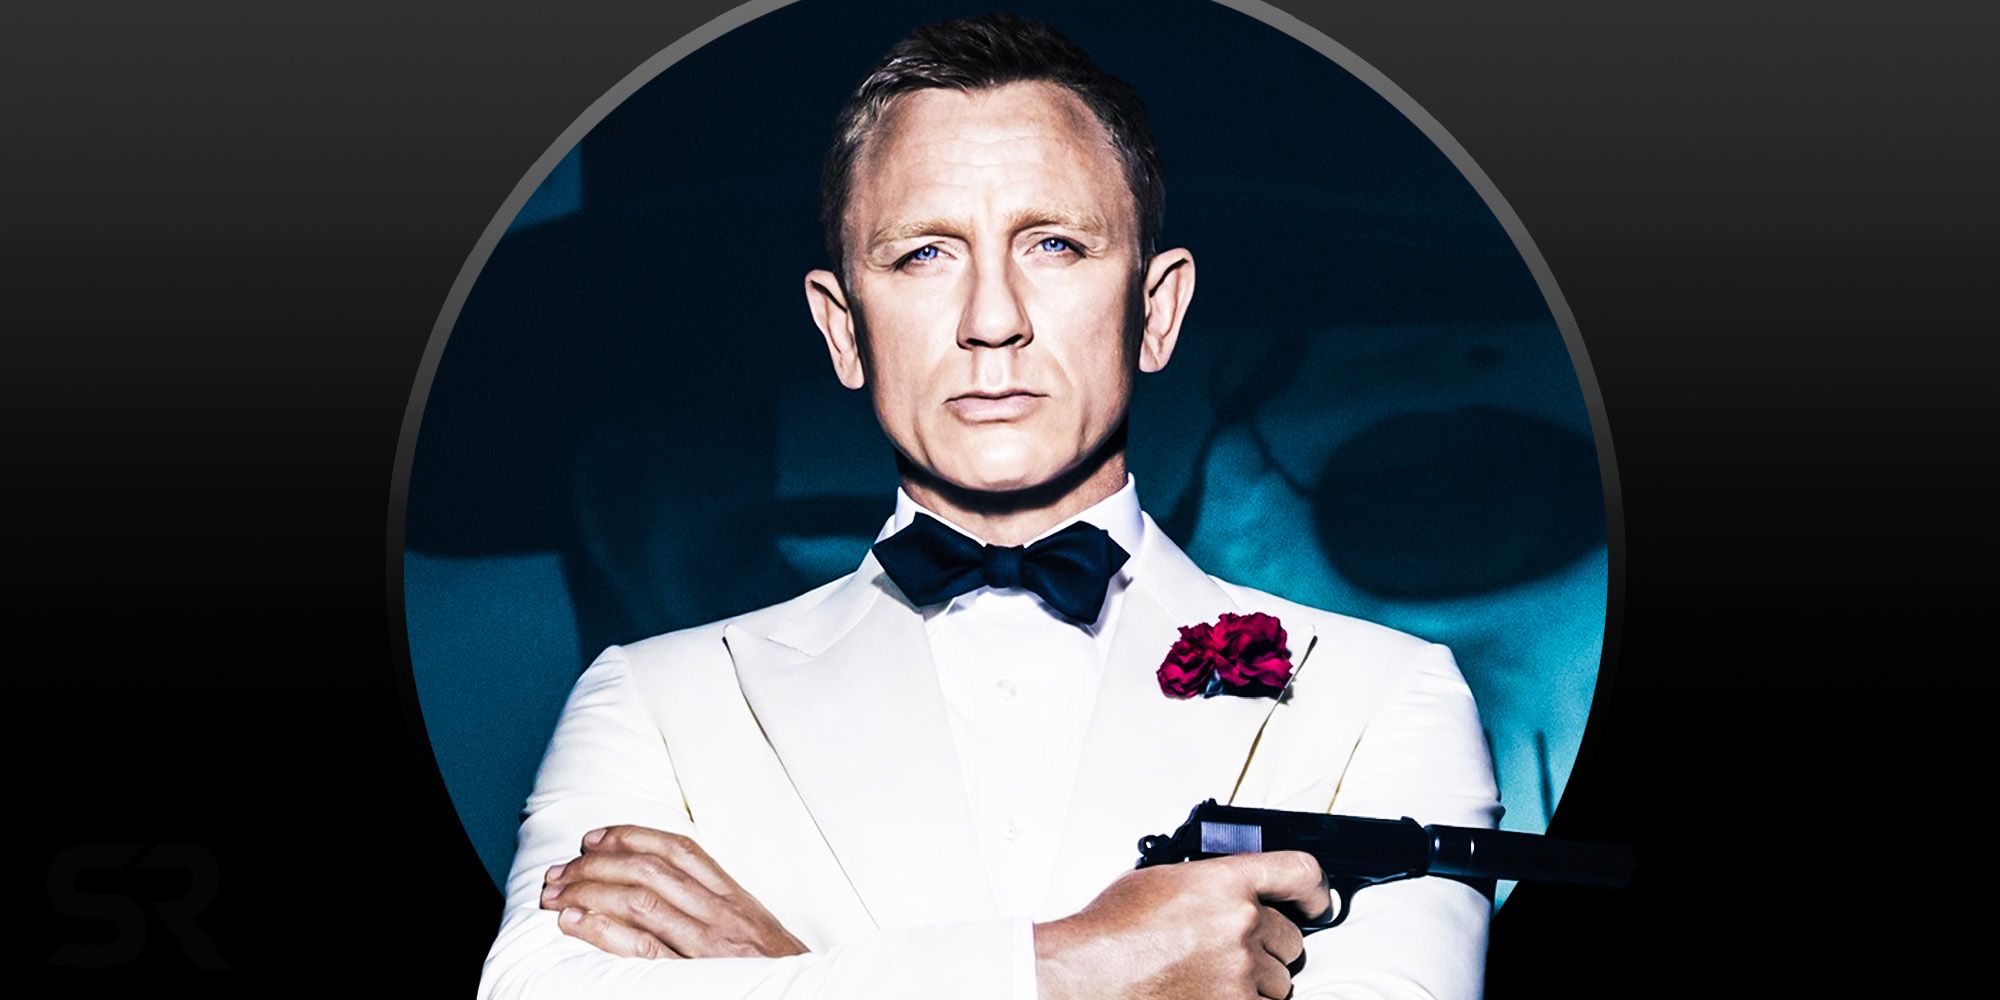 7 Ways James Bond 26 Has To Be Different From Daniel Craig's 007 Era